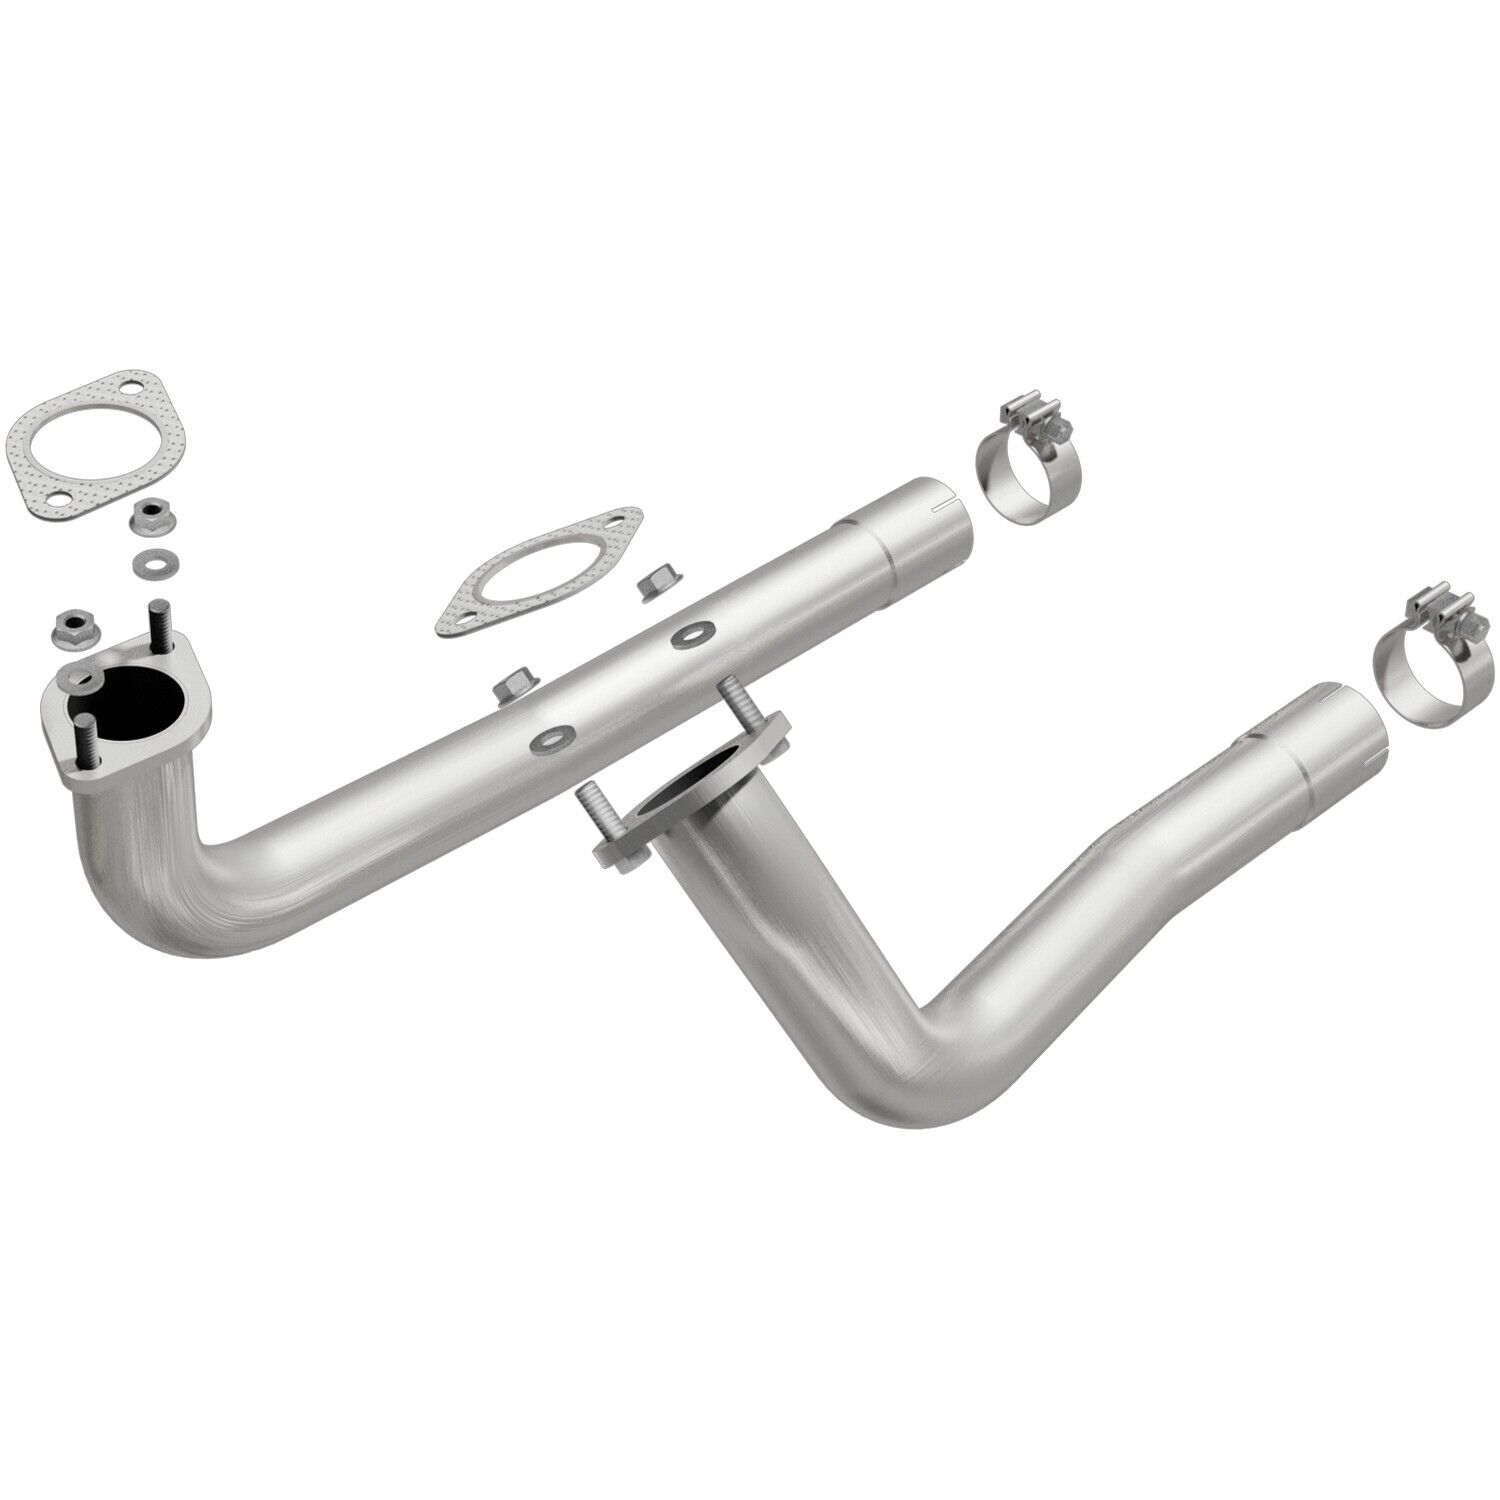 Magnaflow 19304 Performance Exhaust Manifold Pipes